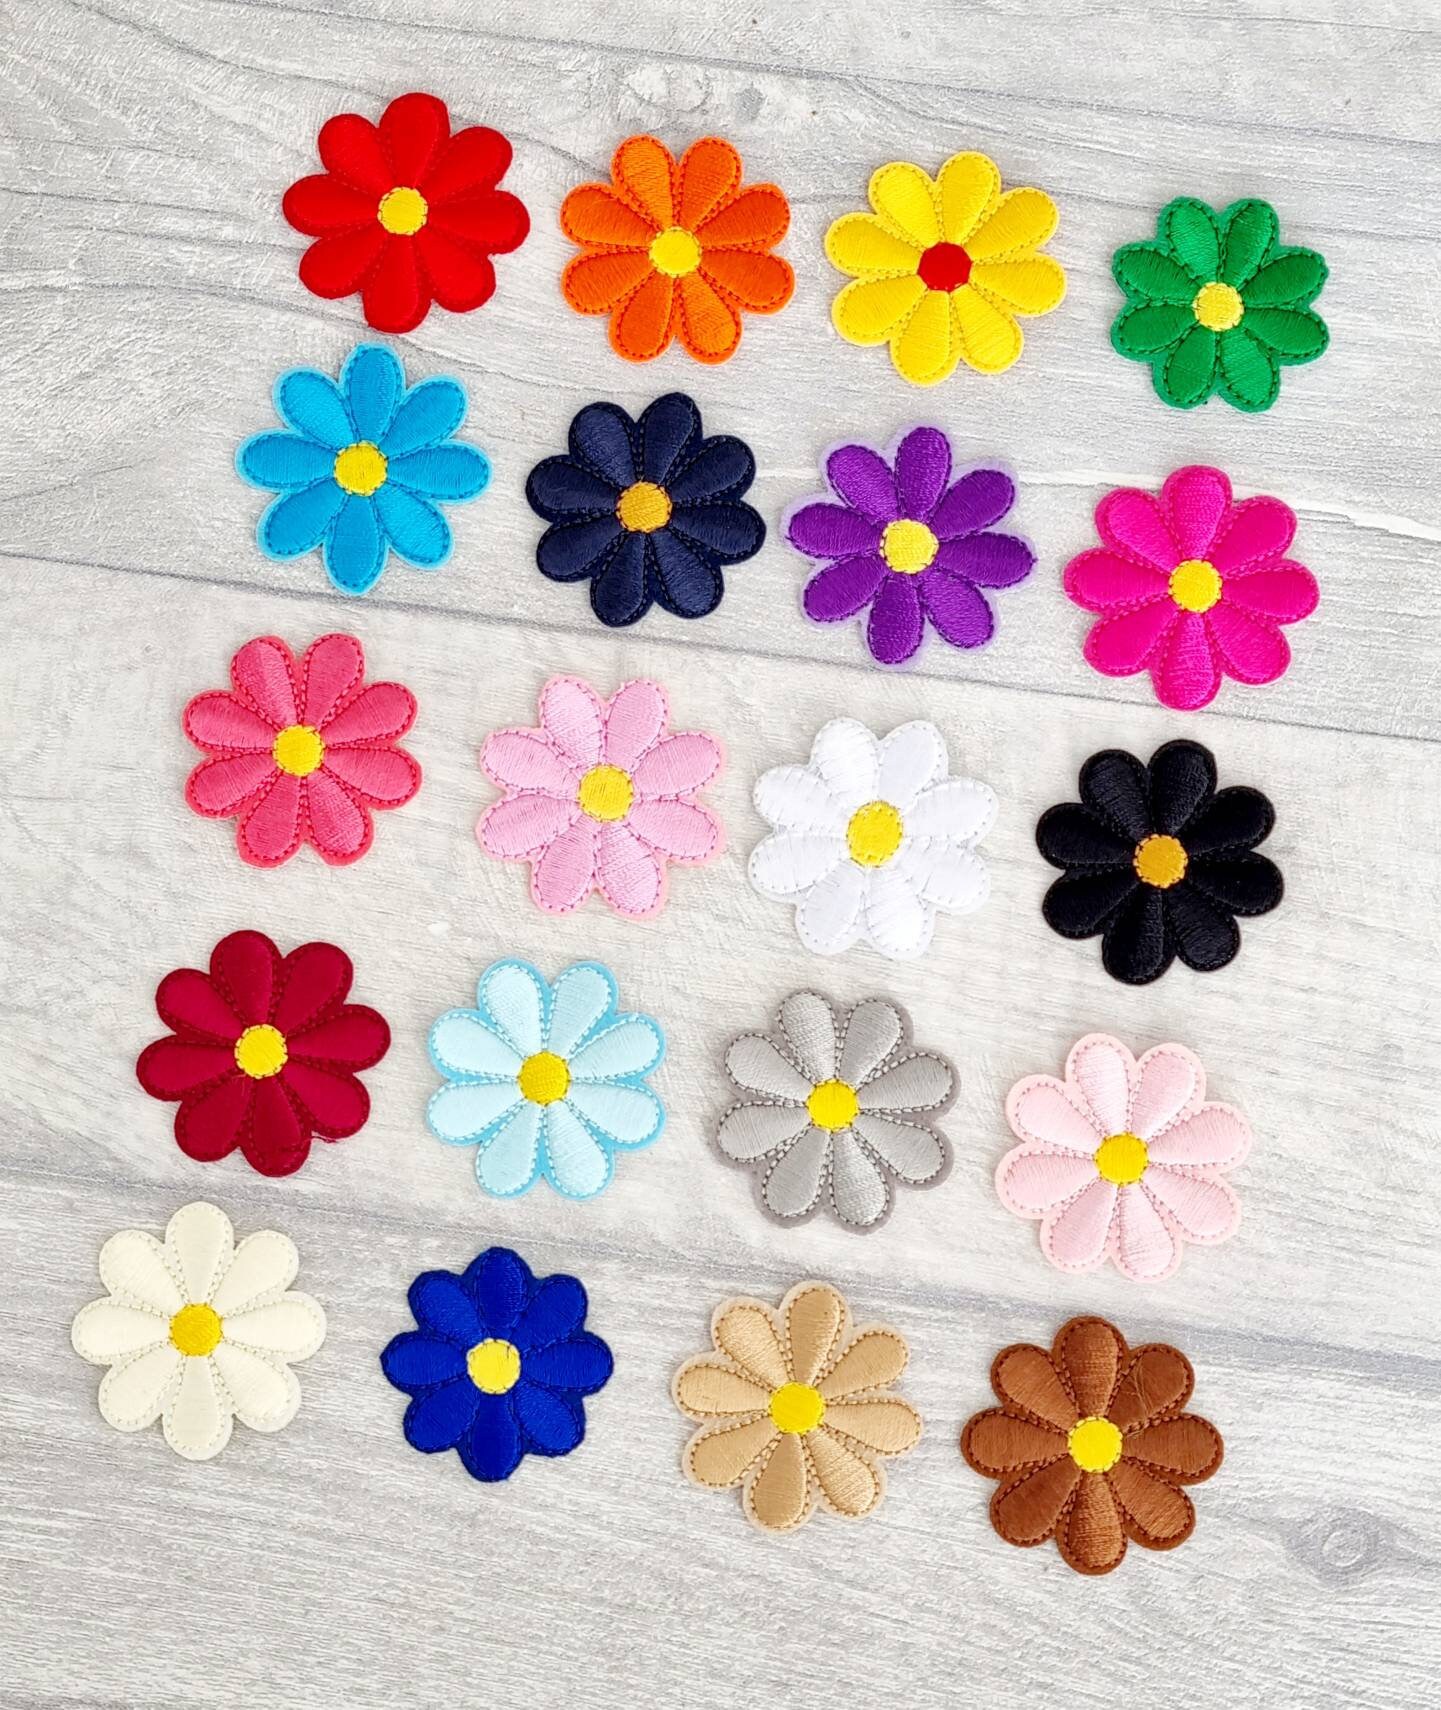  Simplicity Multicolor Daisy Flowers Applique Clothing Iron On  Patches, 8pc, Sizes Vary